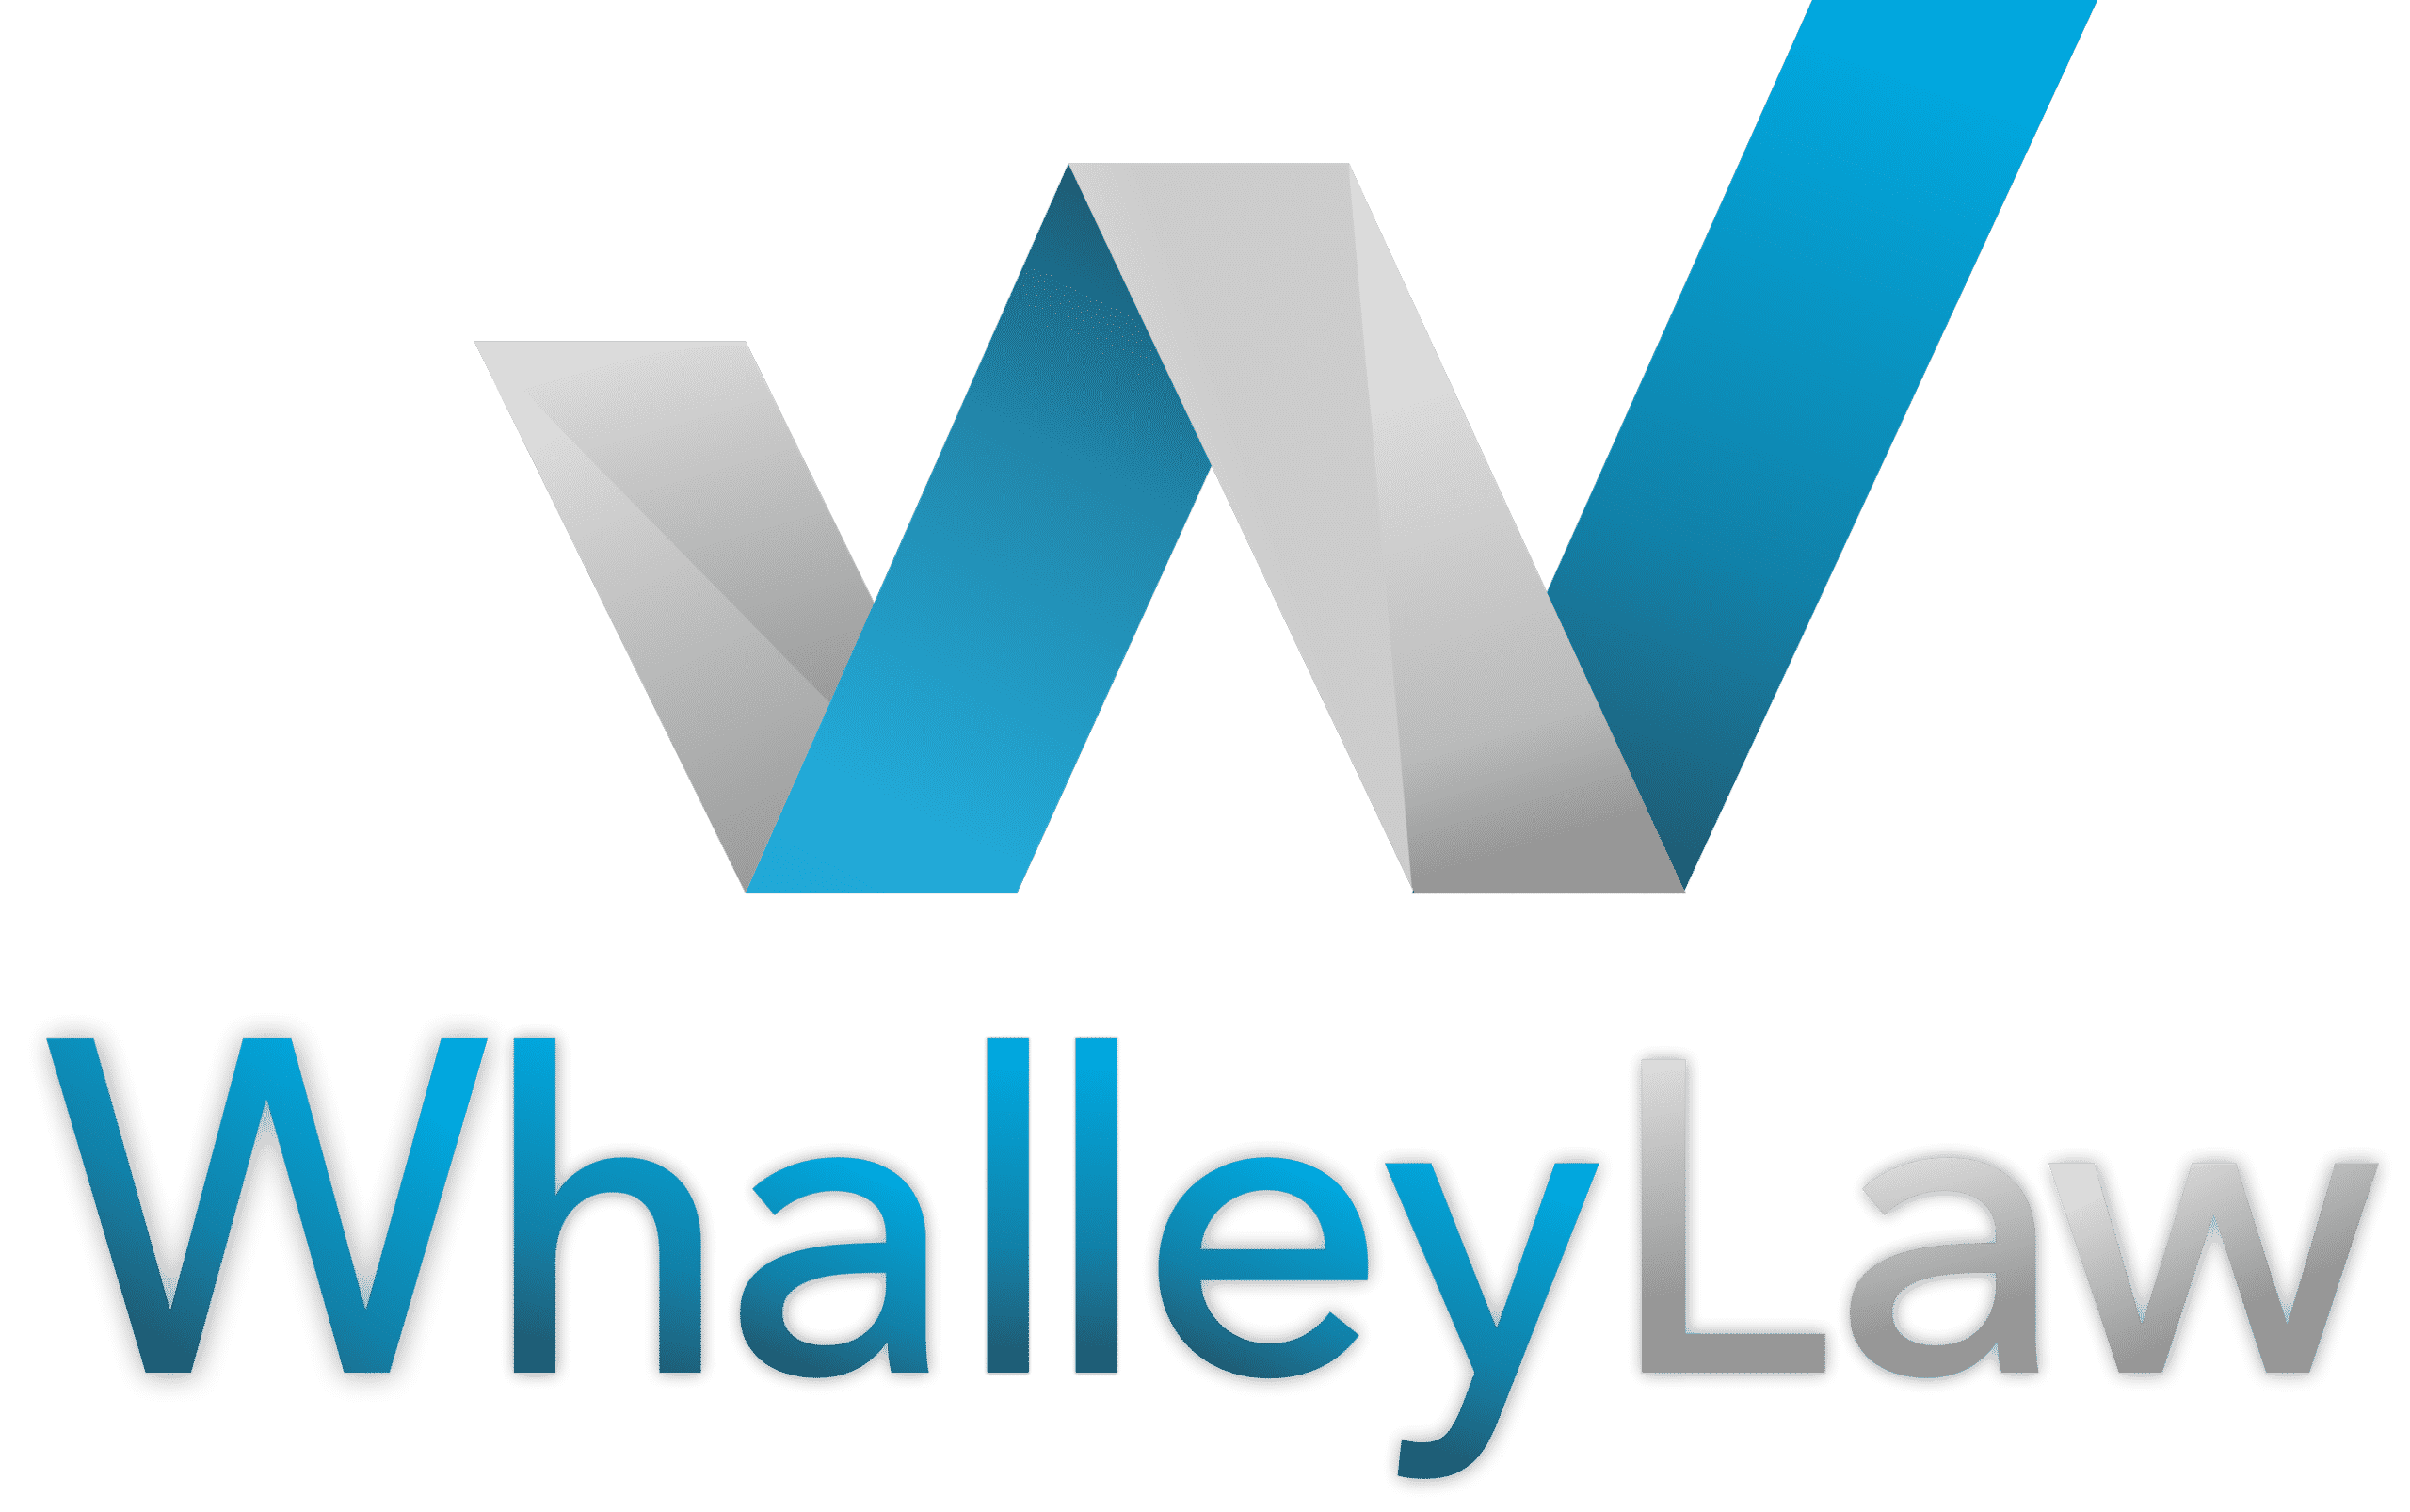 Family Law Firm Washington Whalley Law